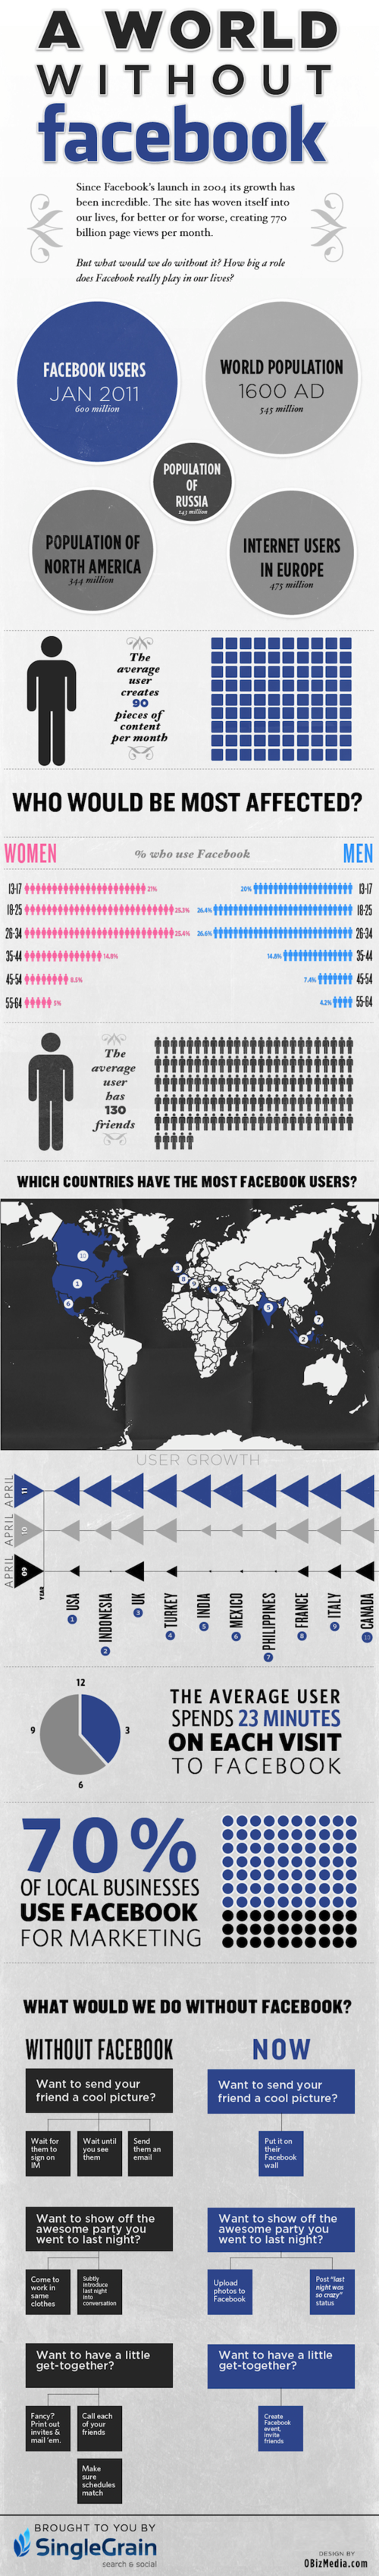 A World Without Facebook [infographic]